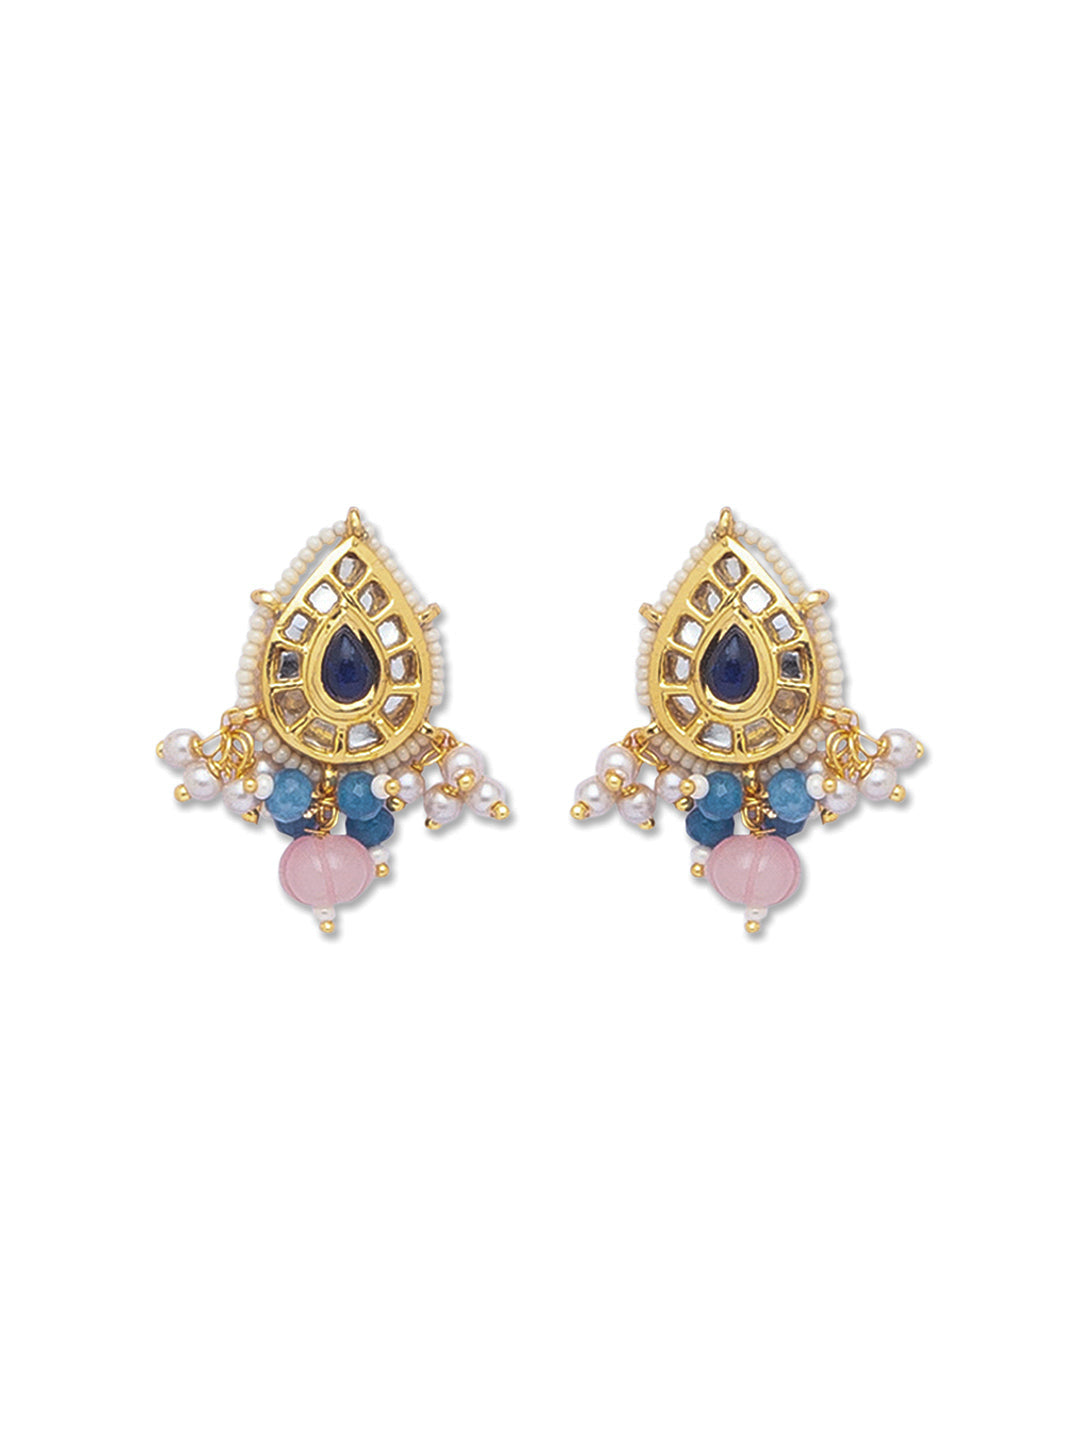 Golden, Blue and Light Pink Kundan Earrings with Onyx